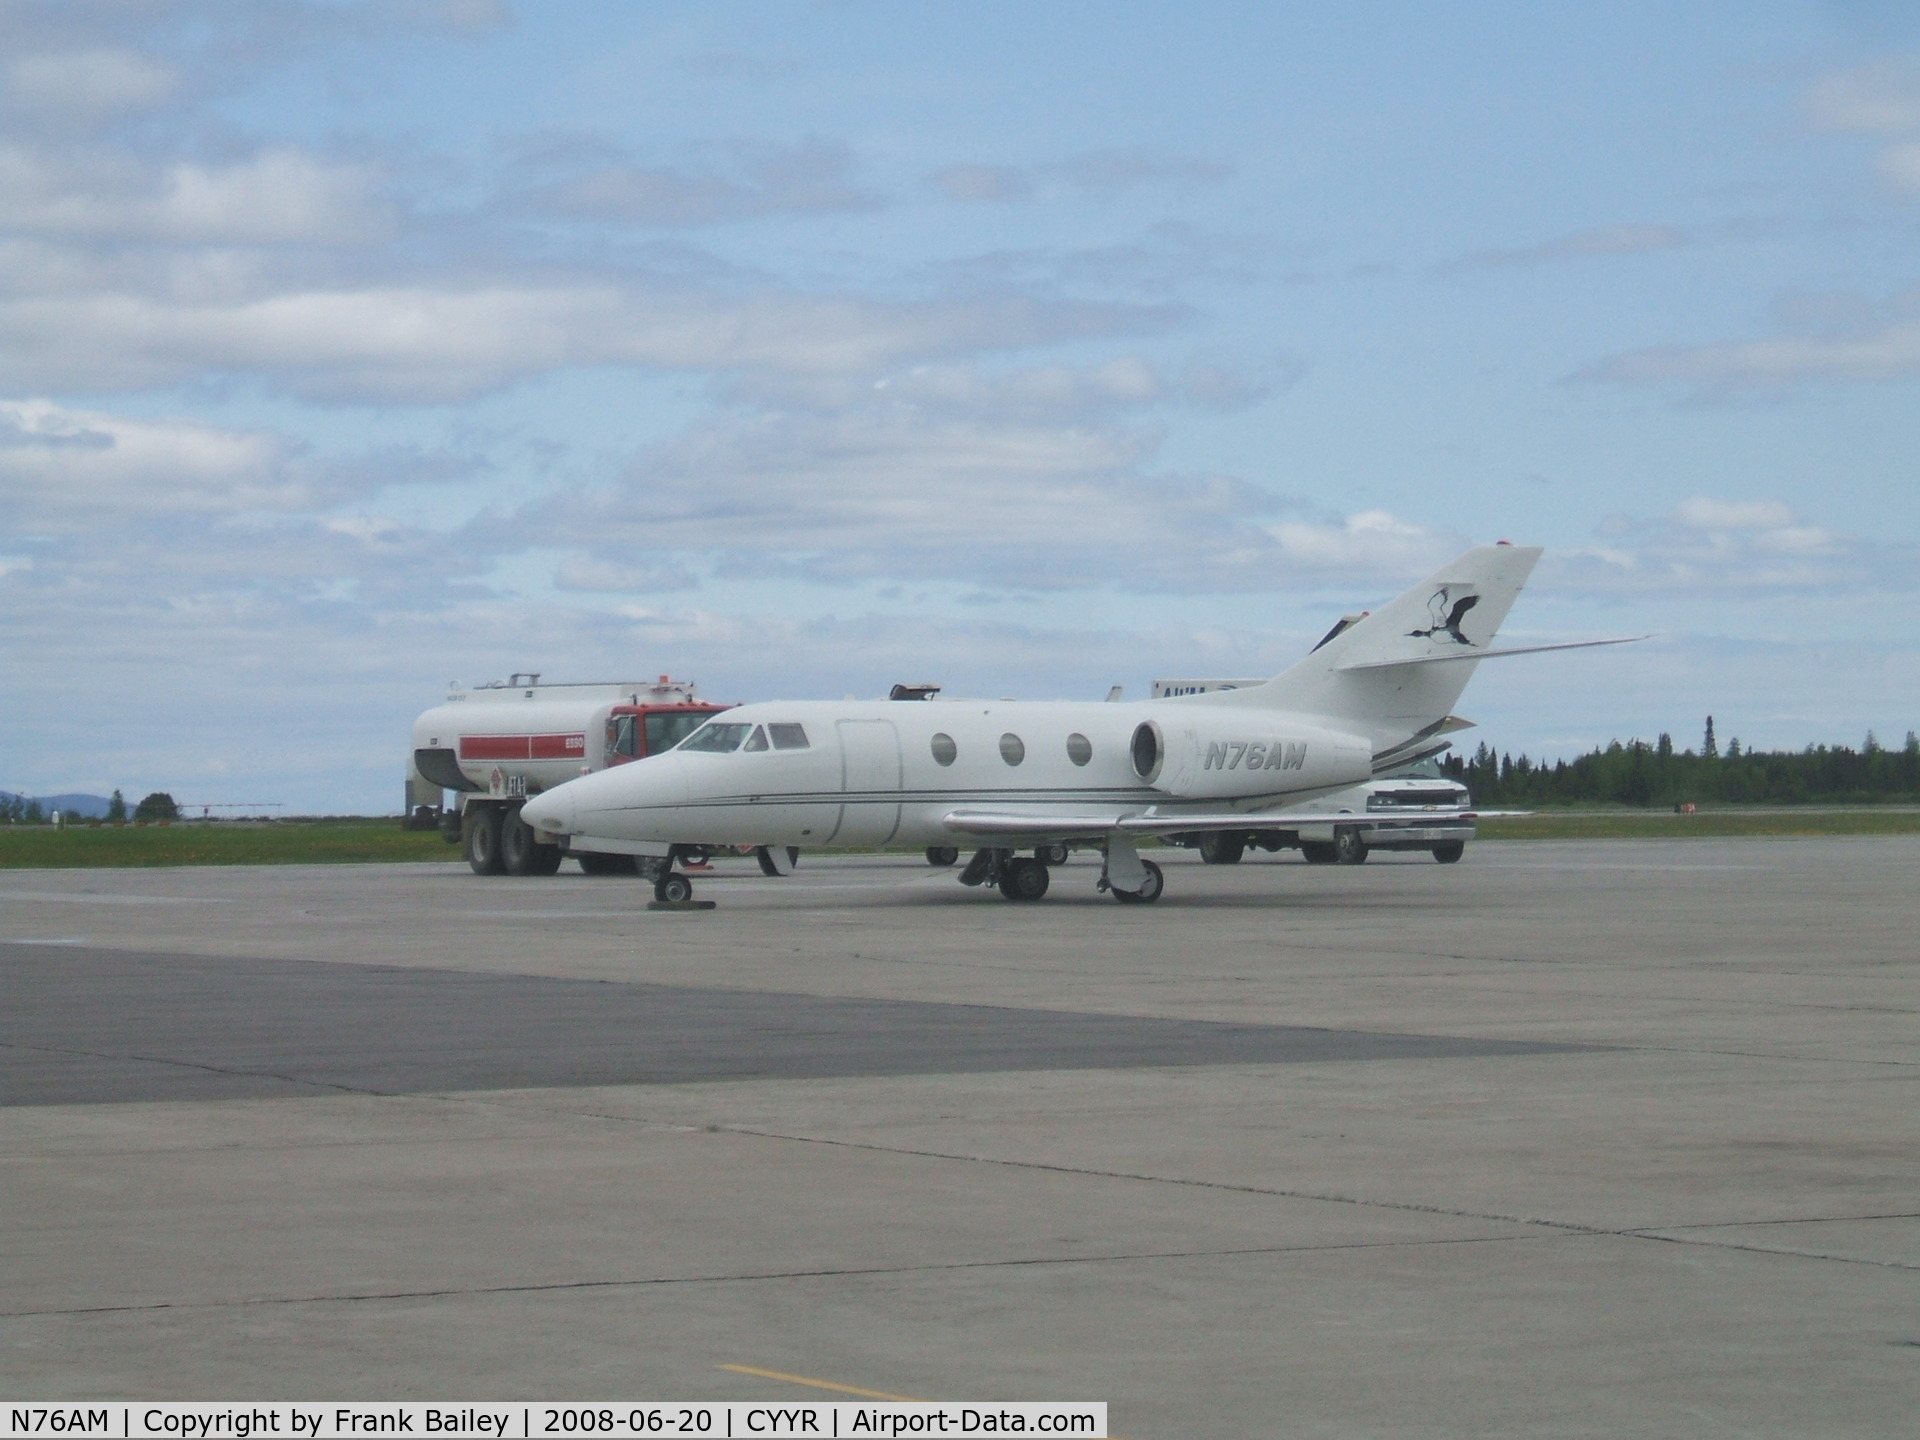 N76AM, 1979 Dassault-Breguet Falcon 10 C/N 157, Parked at Woodwards FBO  Goose Airport NL